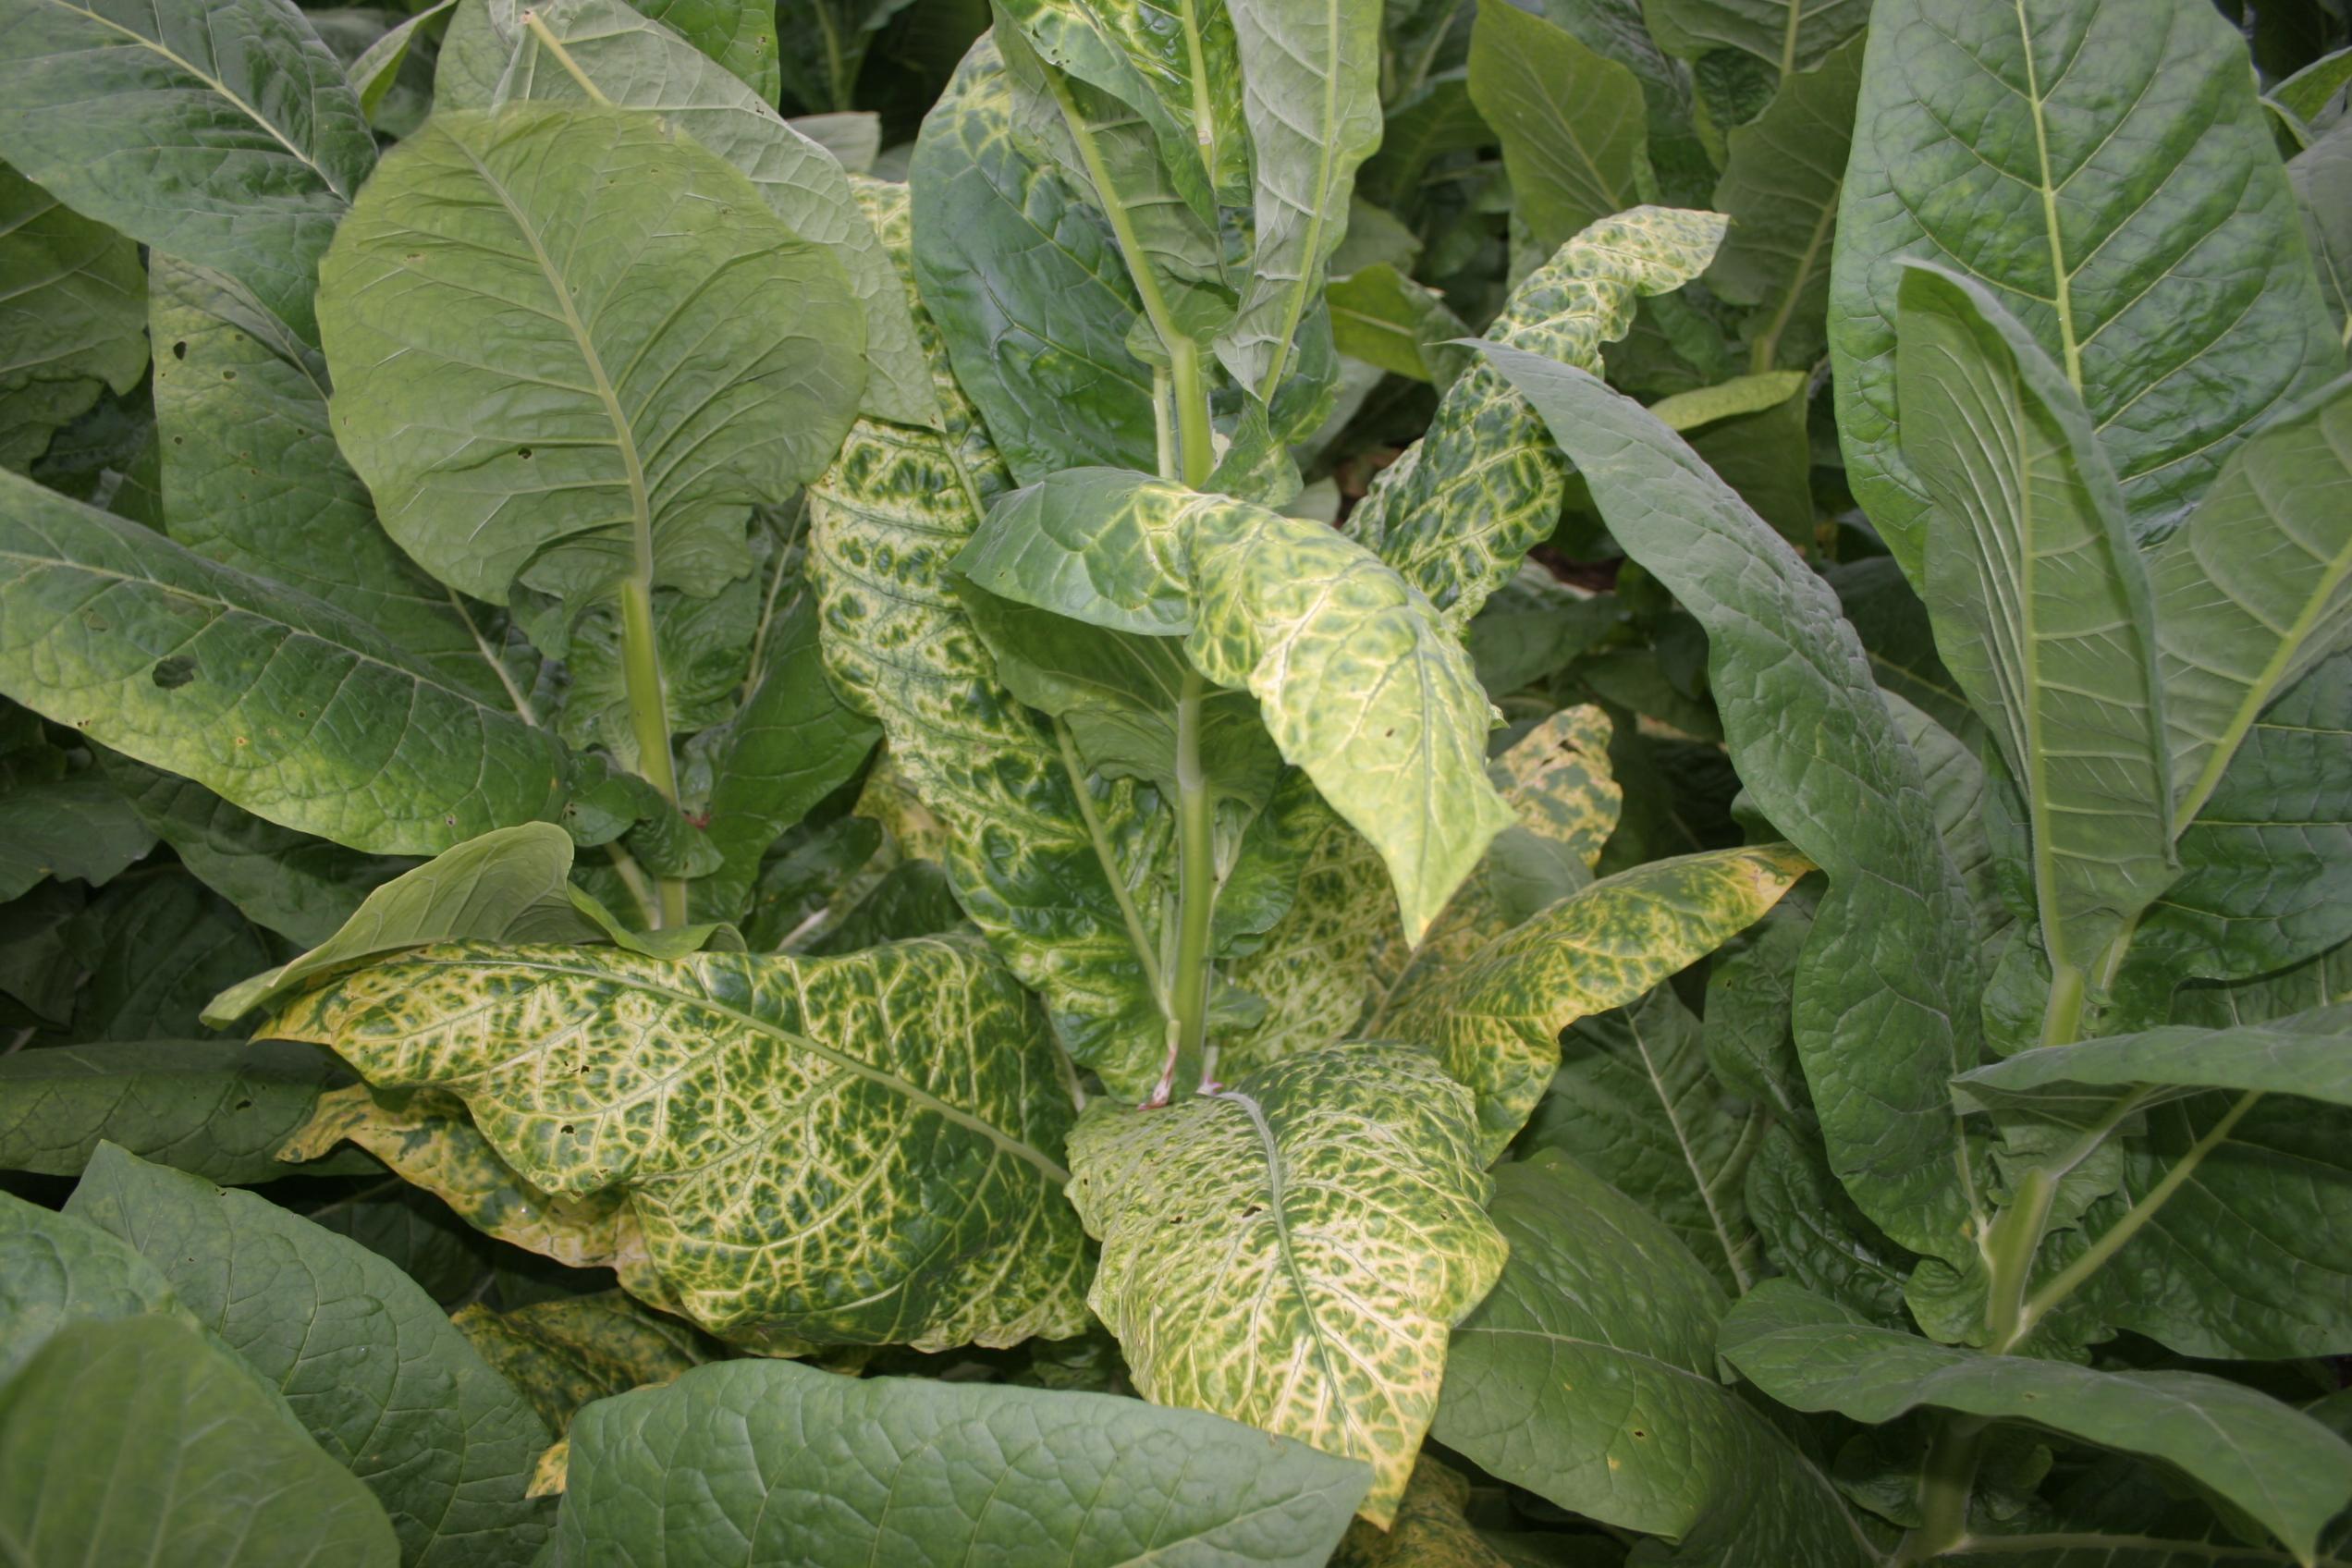 Alfalfa mosaic virus symtoms can include bright yellowing along leaf veins, broad rings, and mosaic patterns. This virus is transmitted by several aphid species.  Some varieties of tobacco are more susceptible than others. (Photo: Kenneth Seebold, UK)